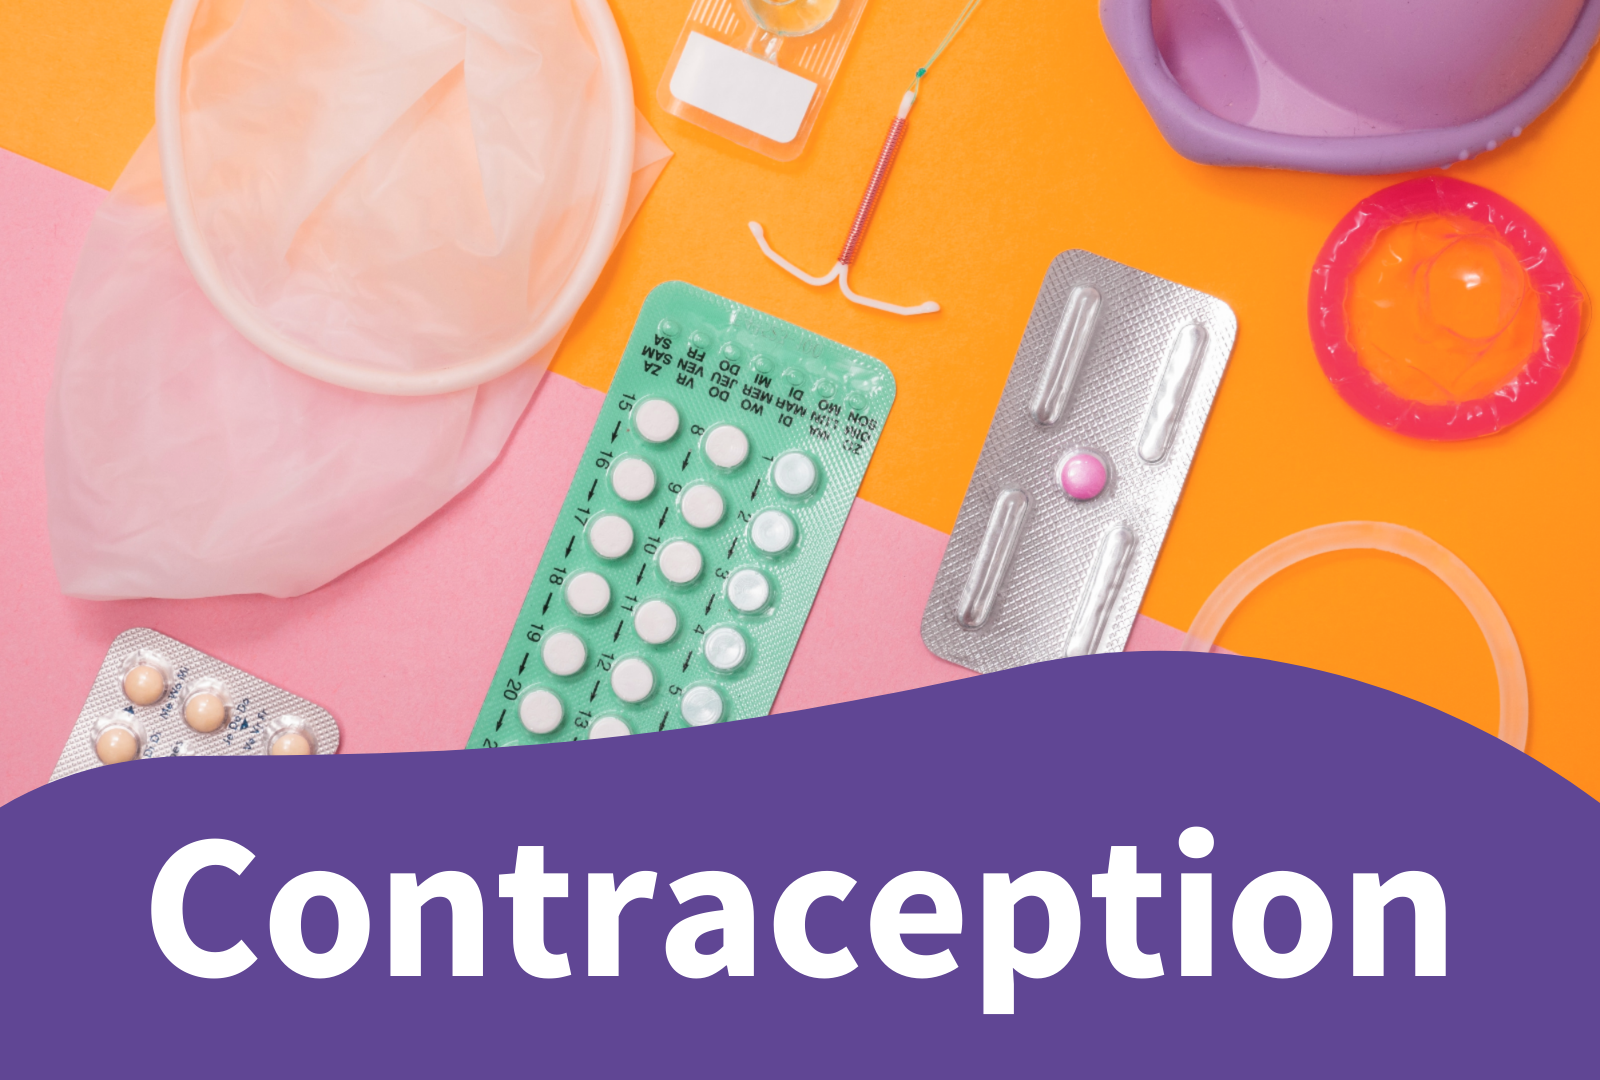 Photo of various contraception methods